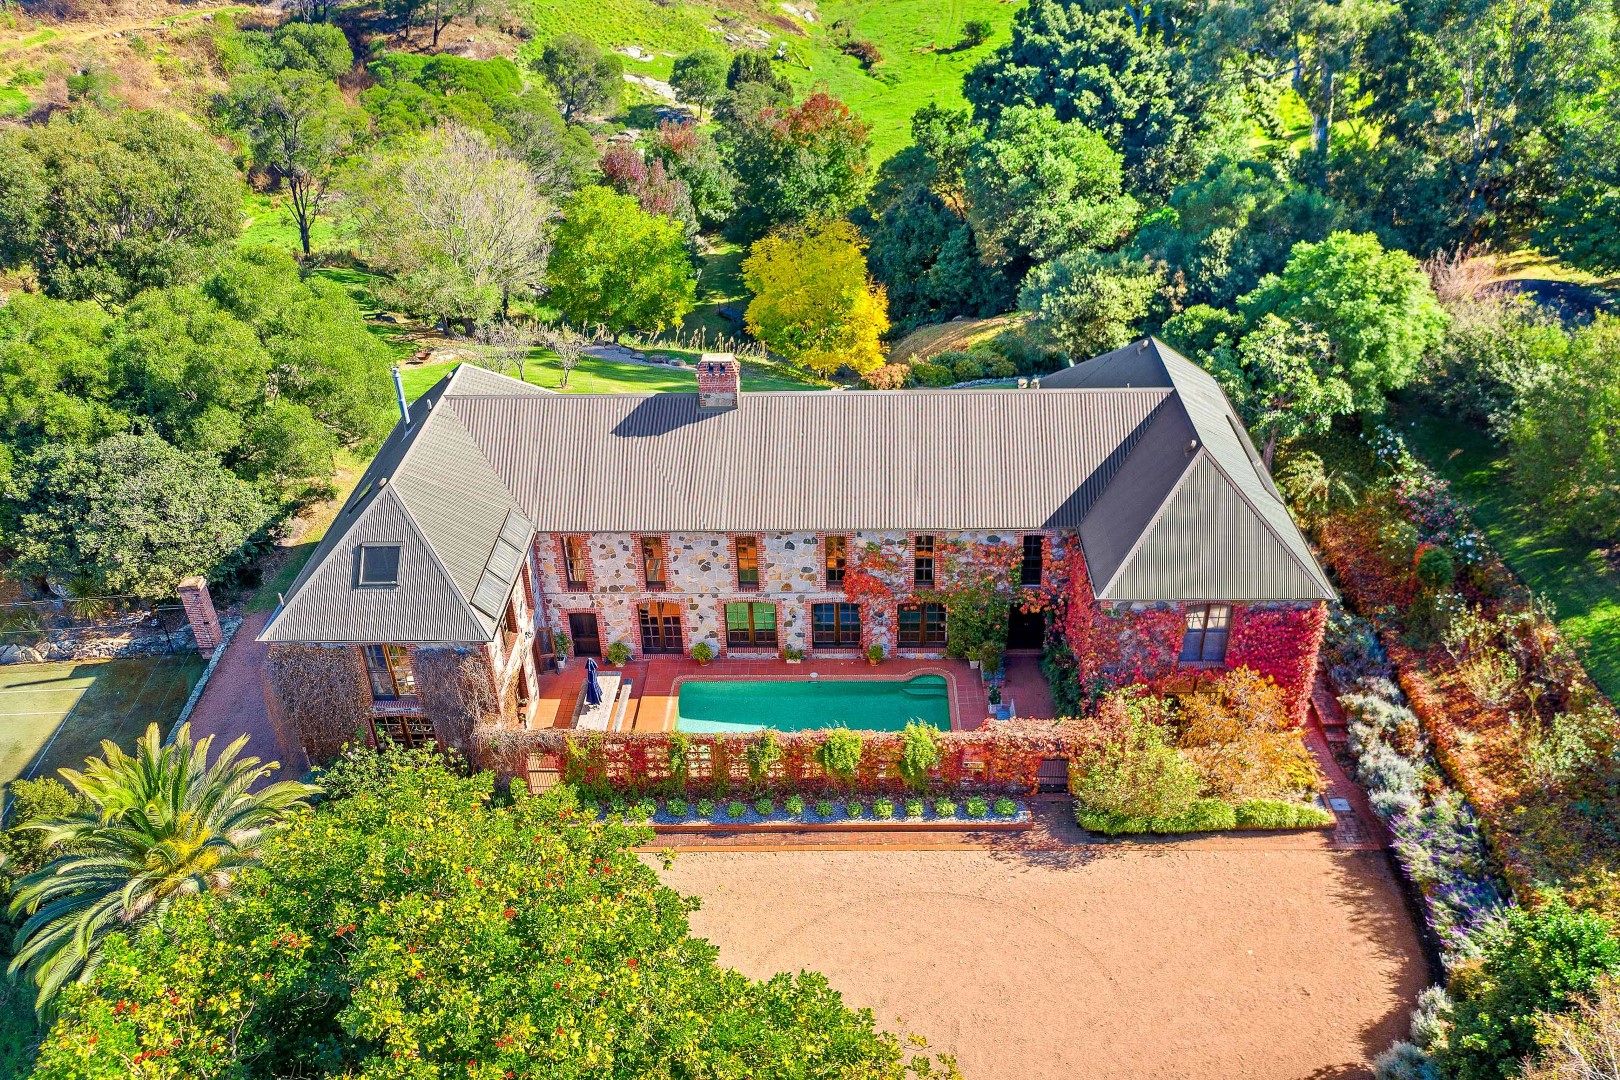 Commanding and impressive yet tasteful and comfortable: a true country estate